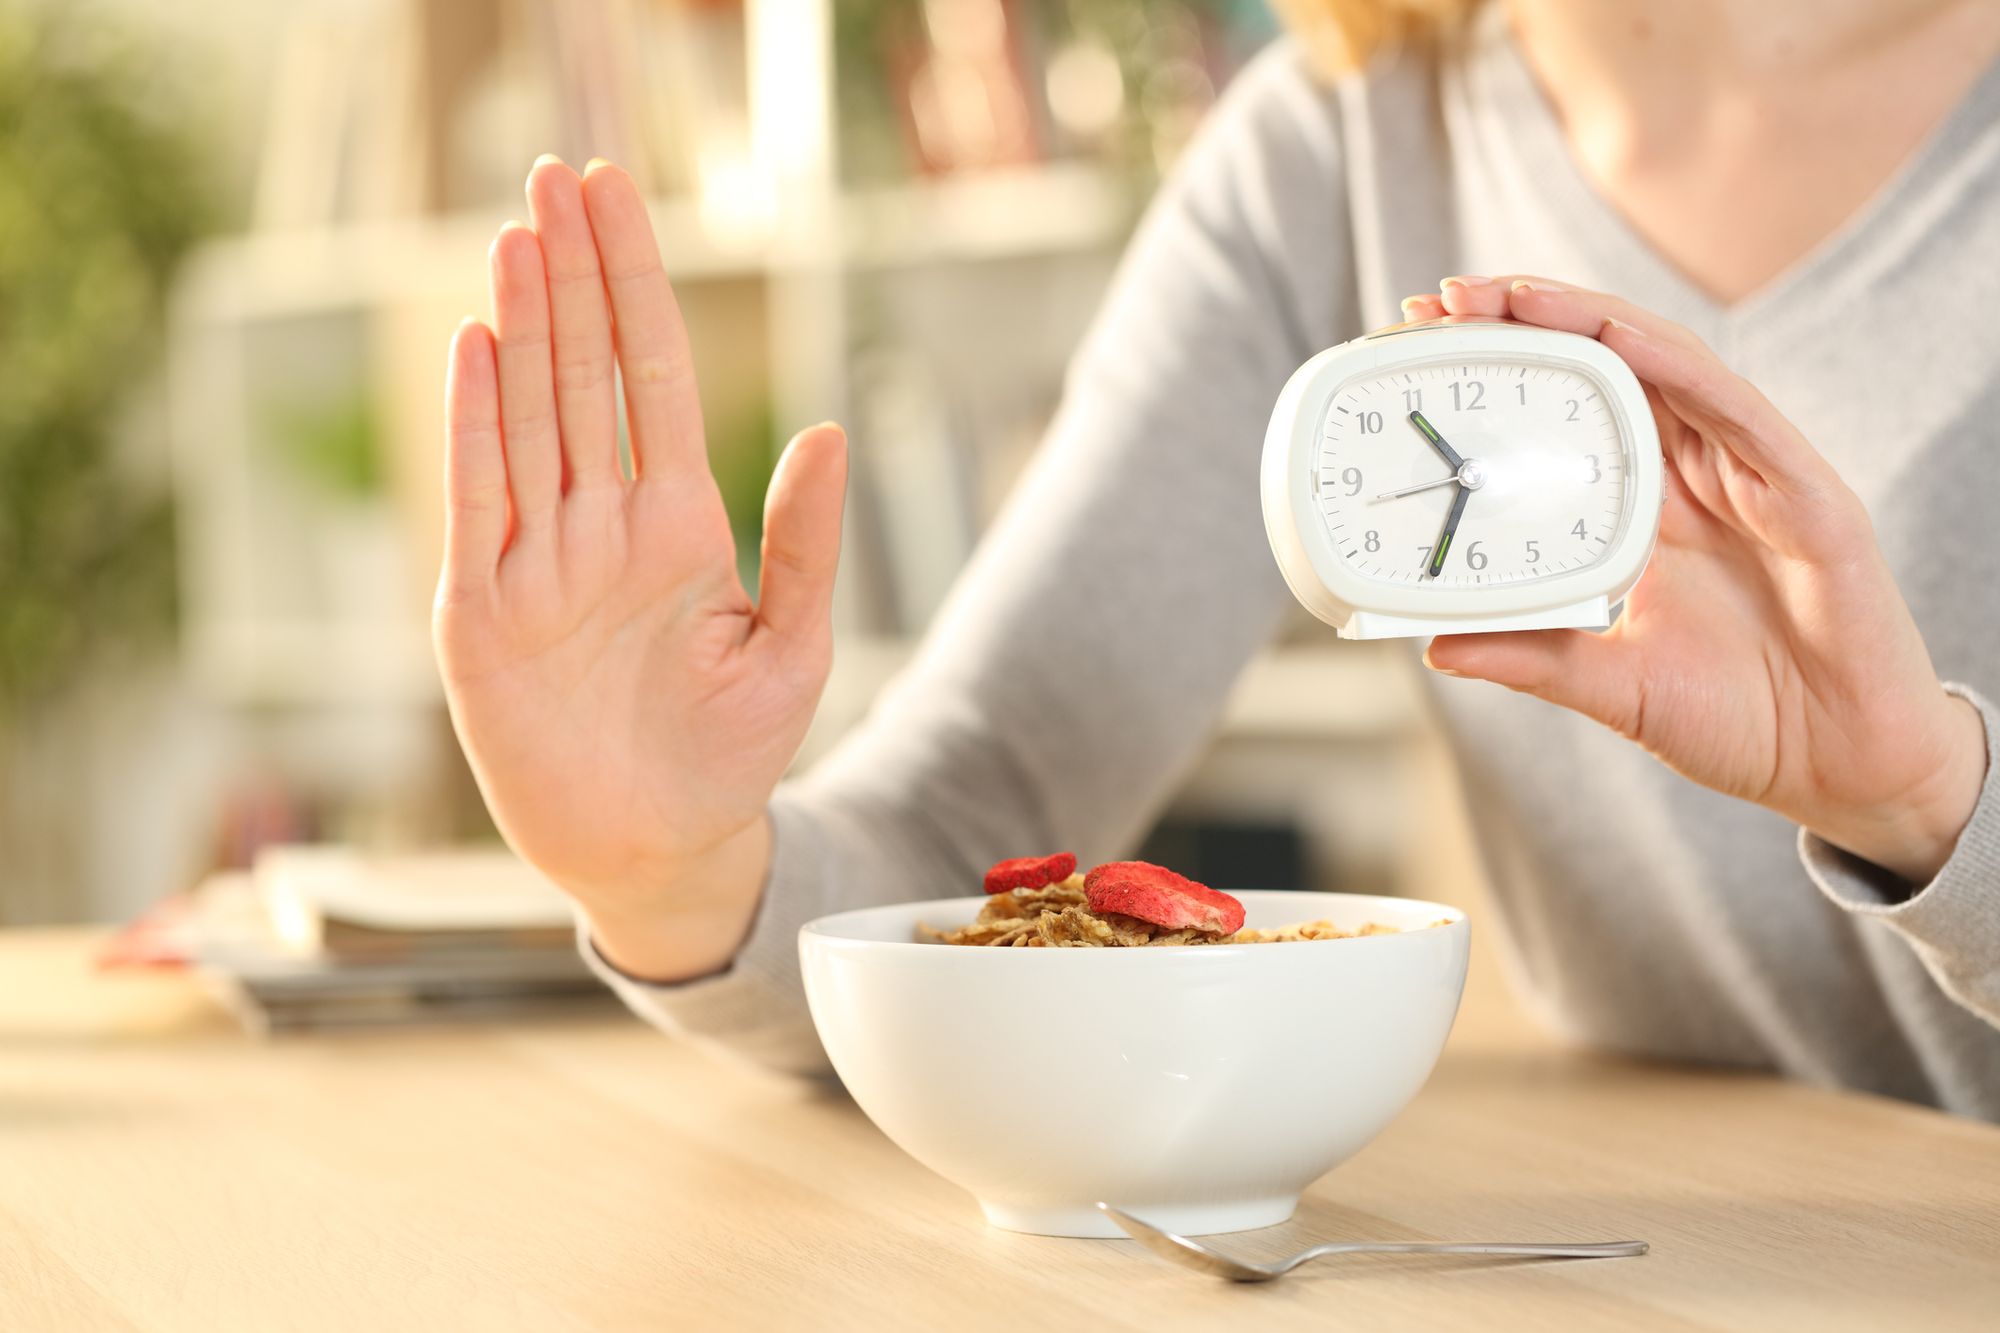 Is intermittent fasting good for weight loss?